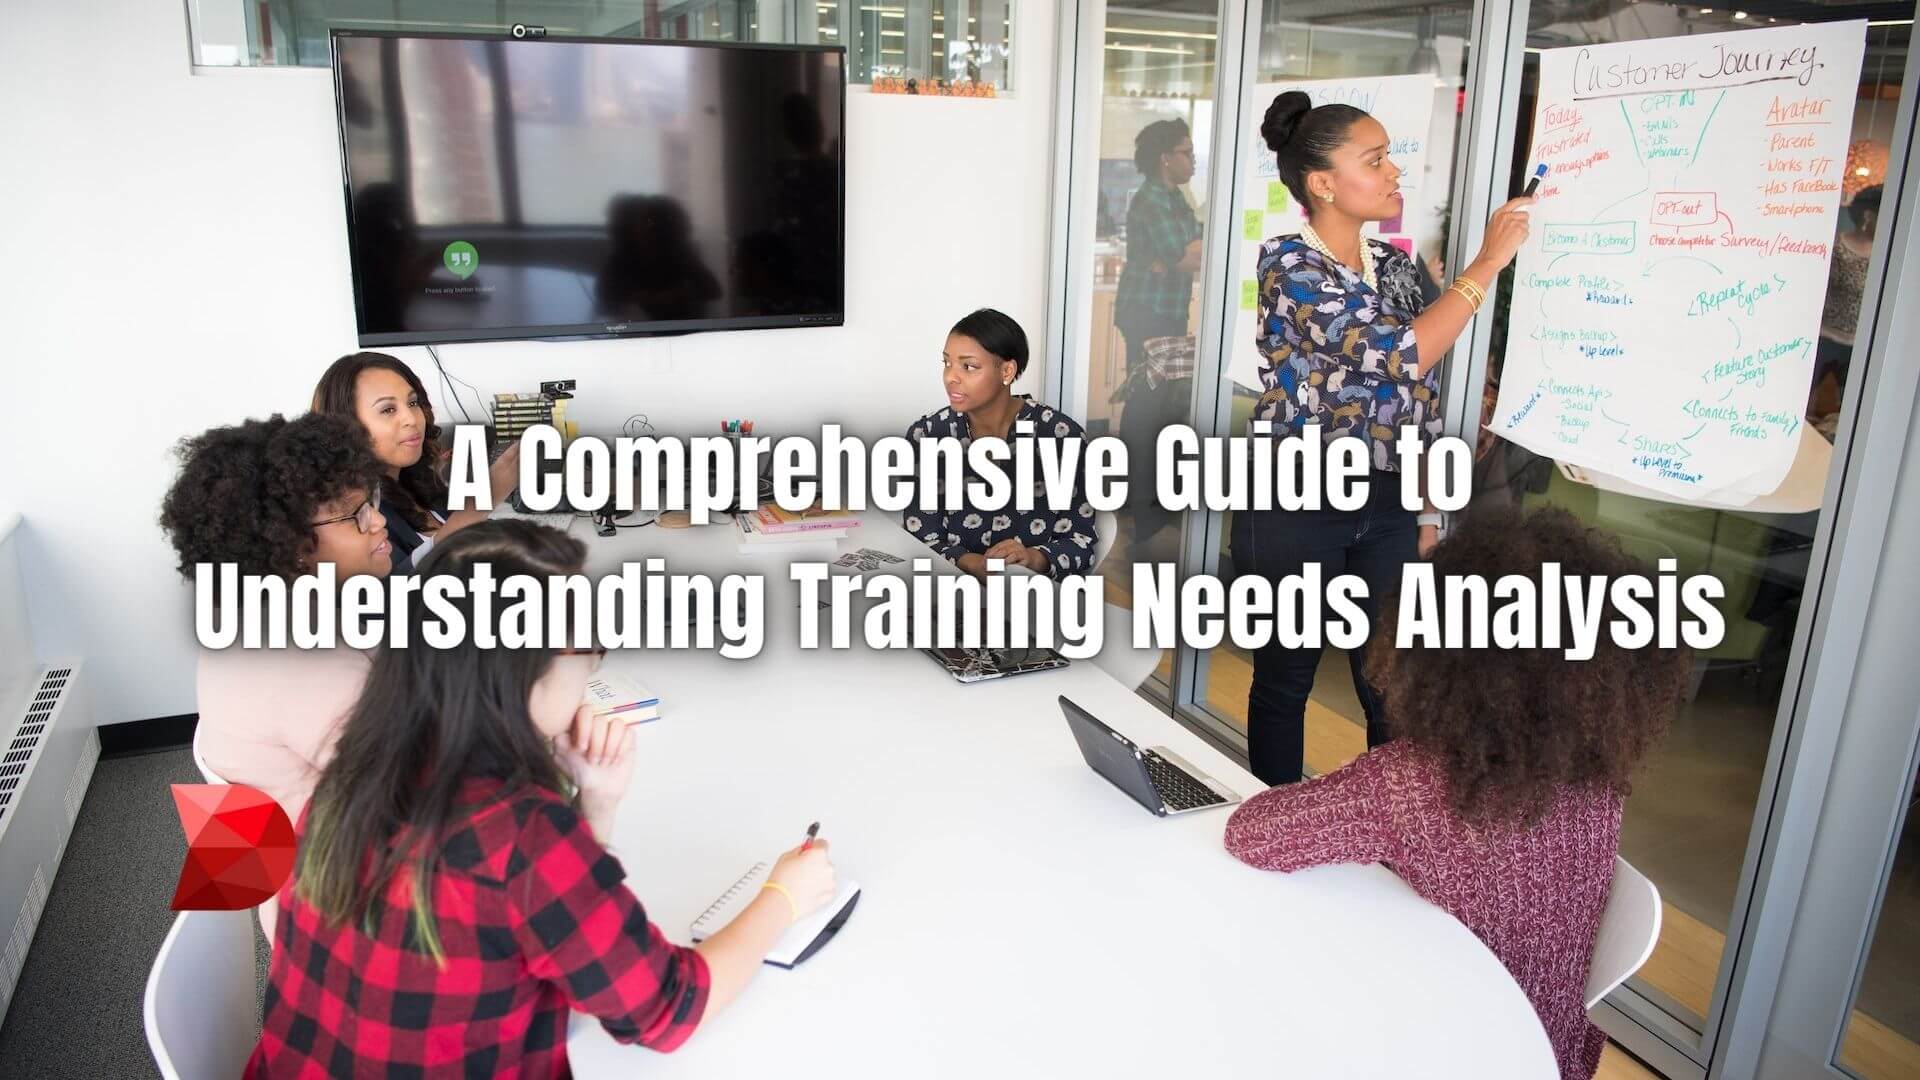 Training Needs Analysis is a process used by organizations to determine what kind of training their employees need. Click here to learn more!